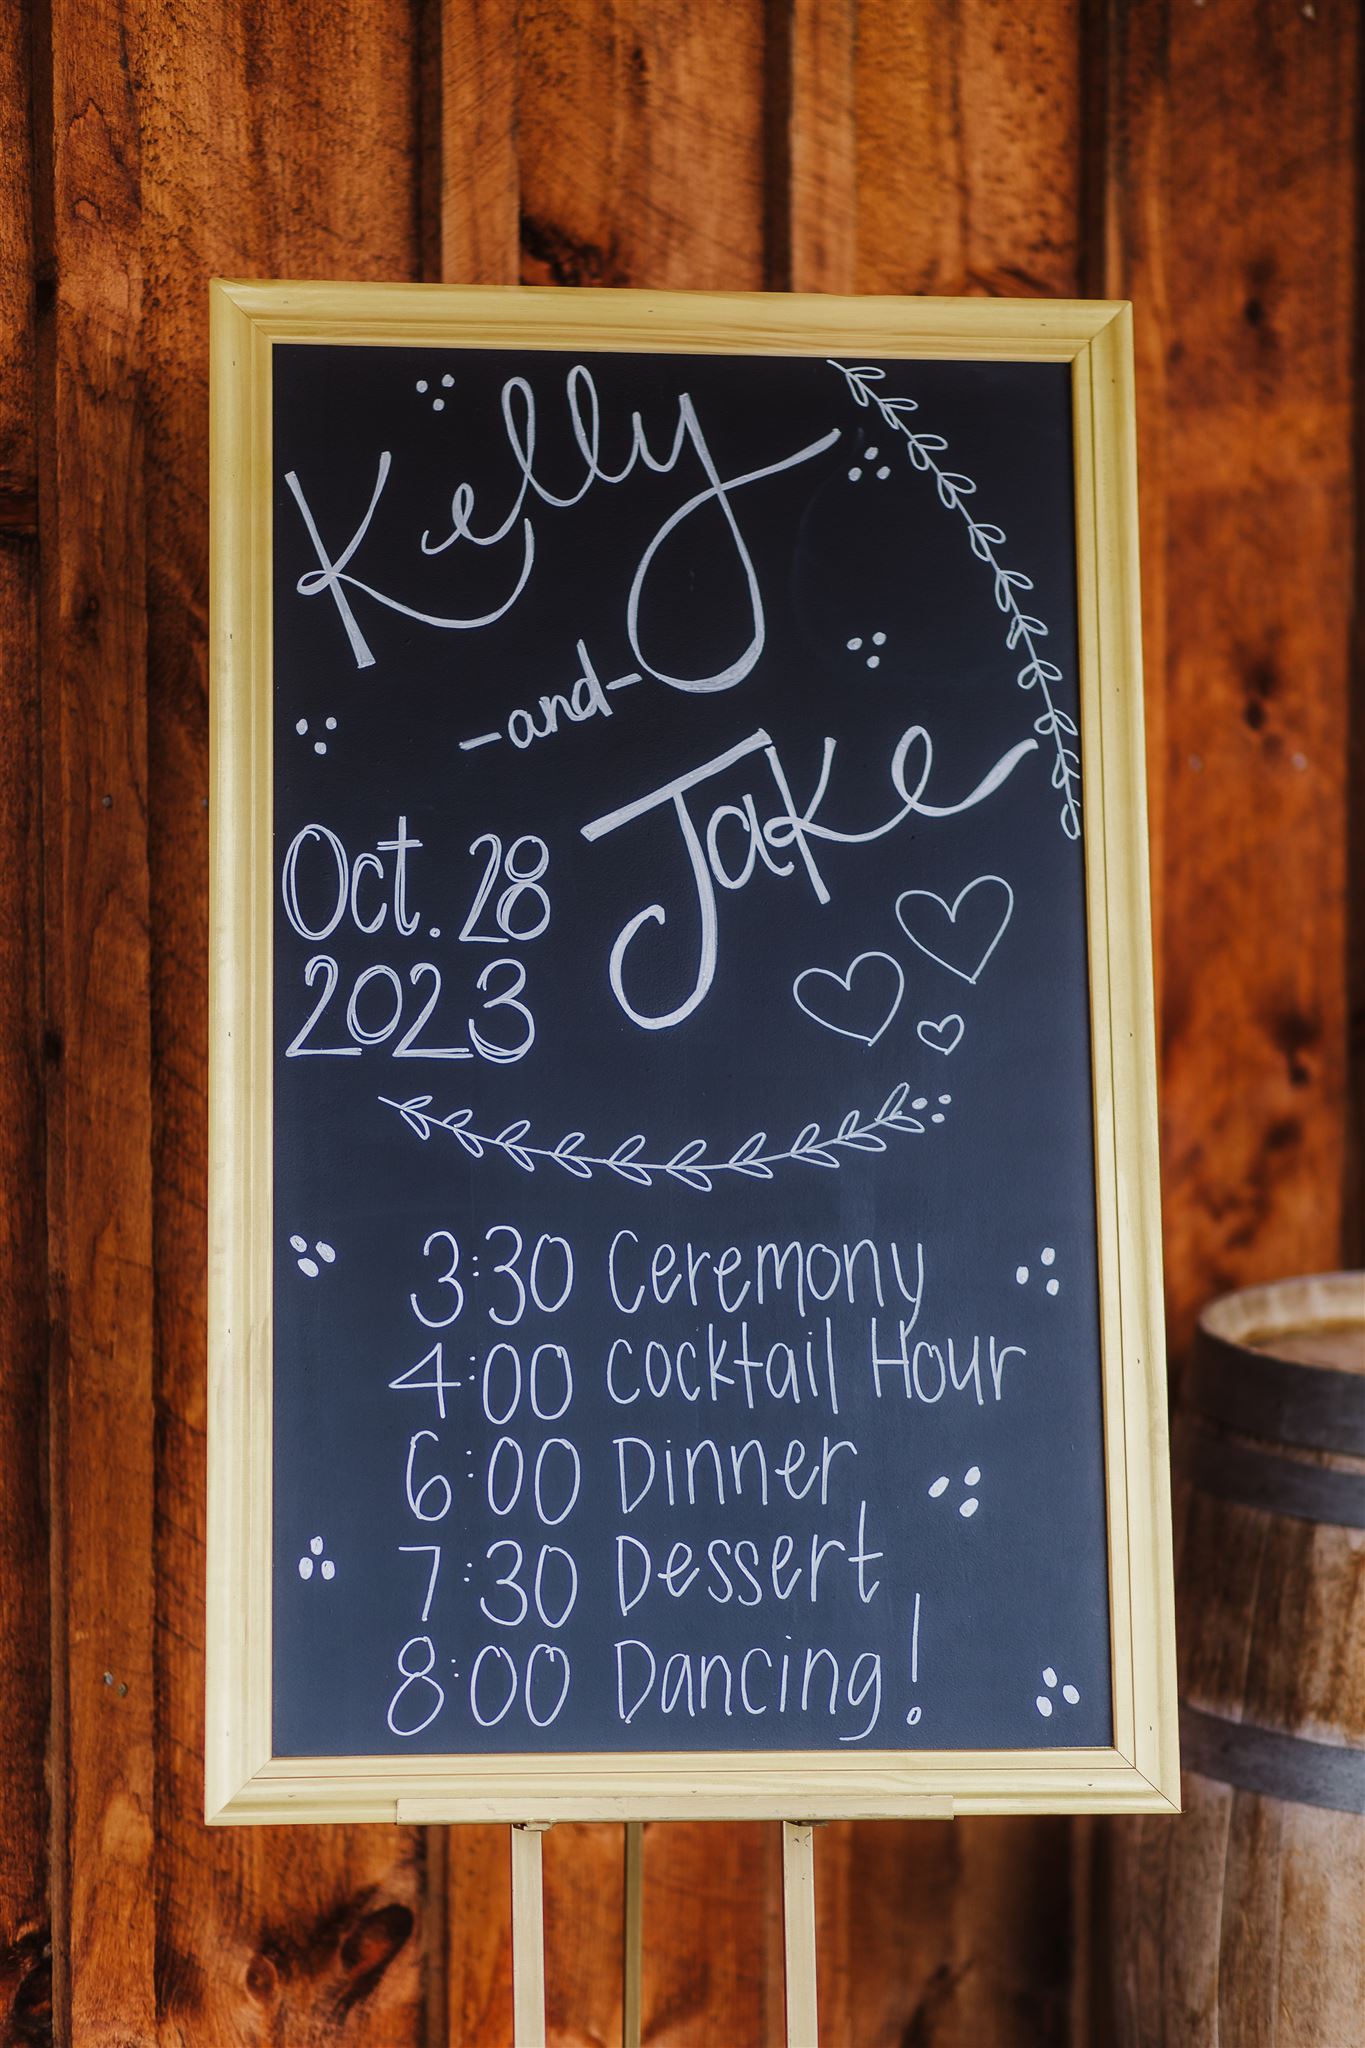 Finding inspiration for reception decorations is so helpful when planning your dream wedding. Reception signs Chalkboard wedding decor Wedding timeline #weddinginspiration #weddingplanning #diywedding #wisconsinweddingphotographer #armywedding